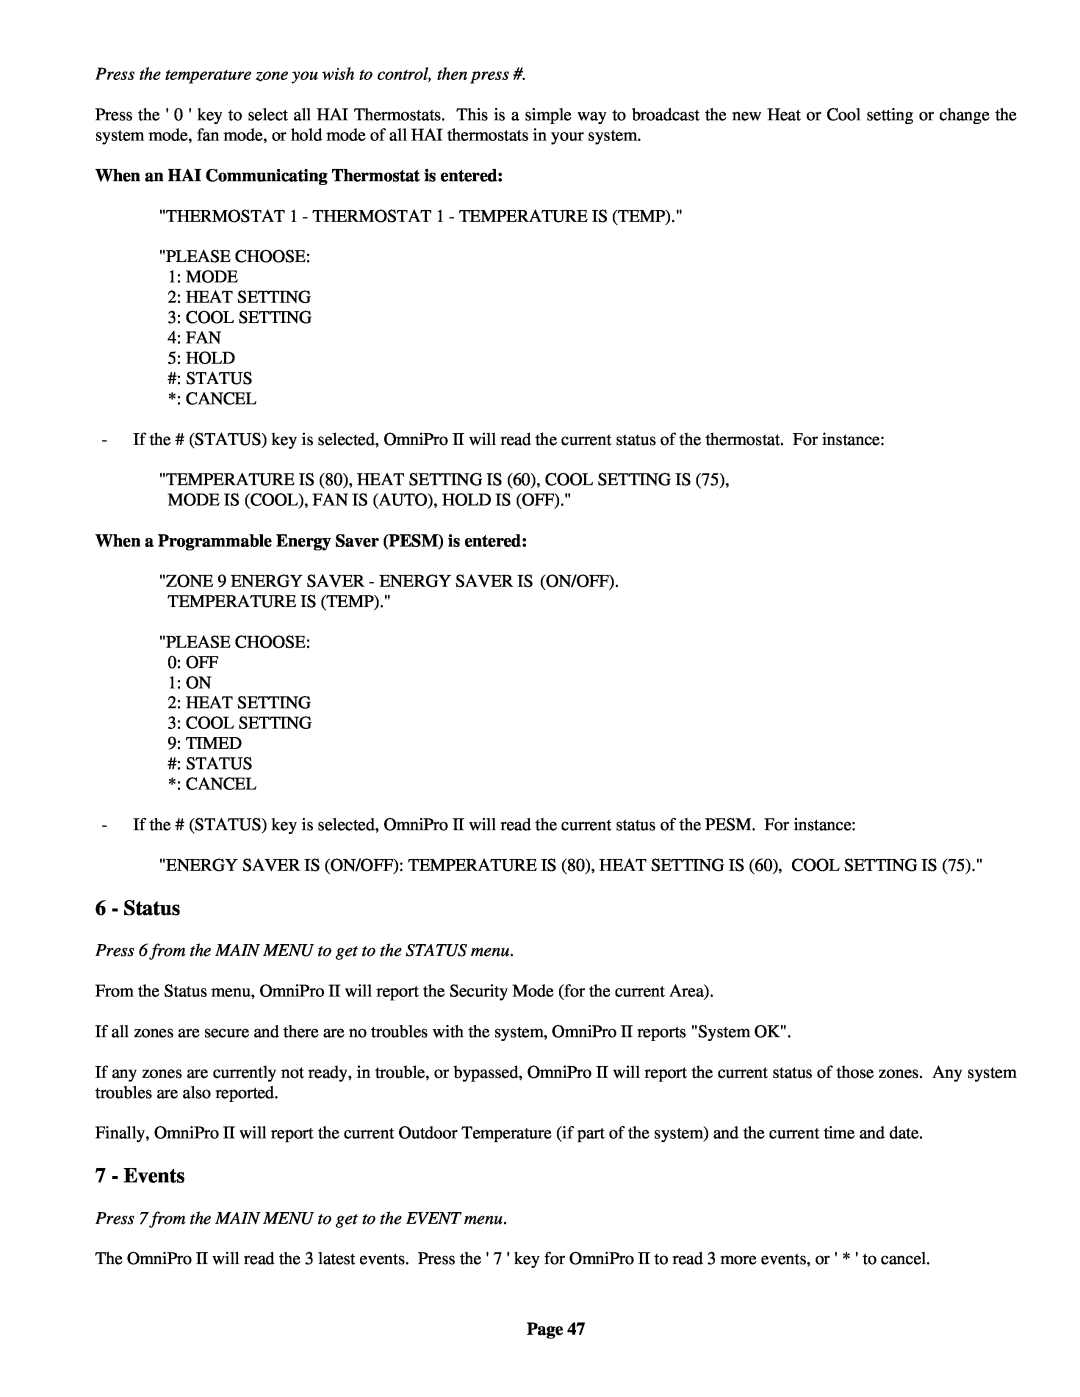 Home Automation OmniPro II owner manual Status, Events, When an HAI Communicating Thermostat is entered, Page 